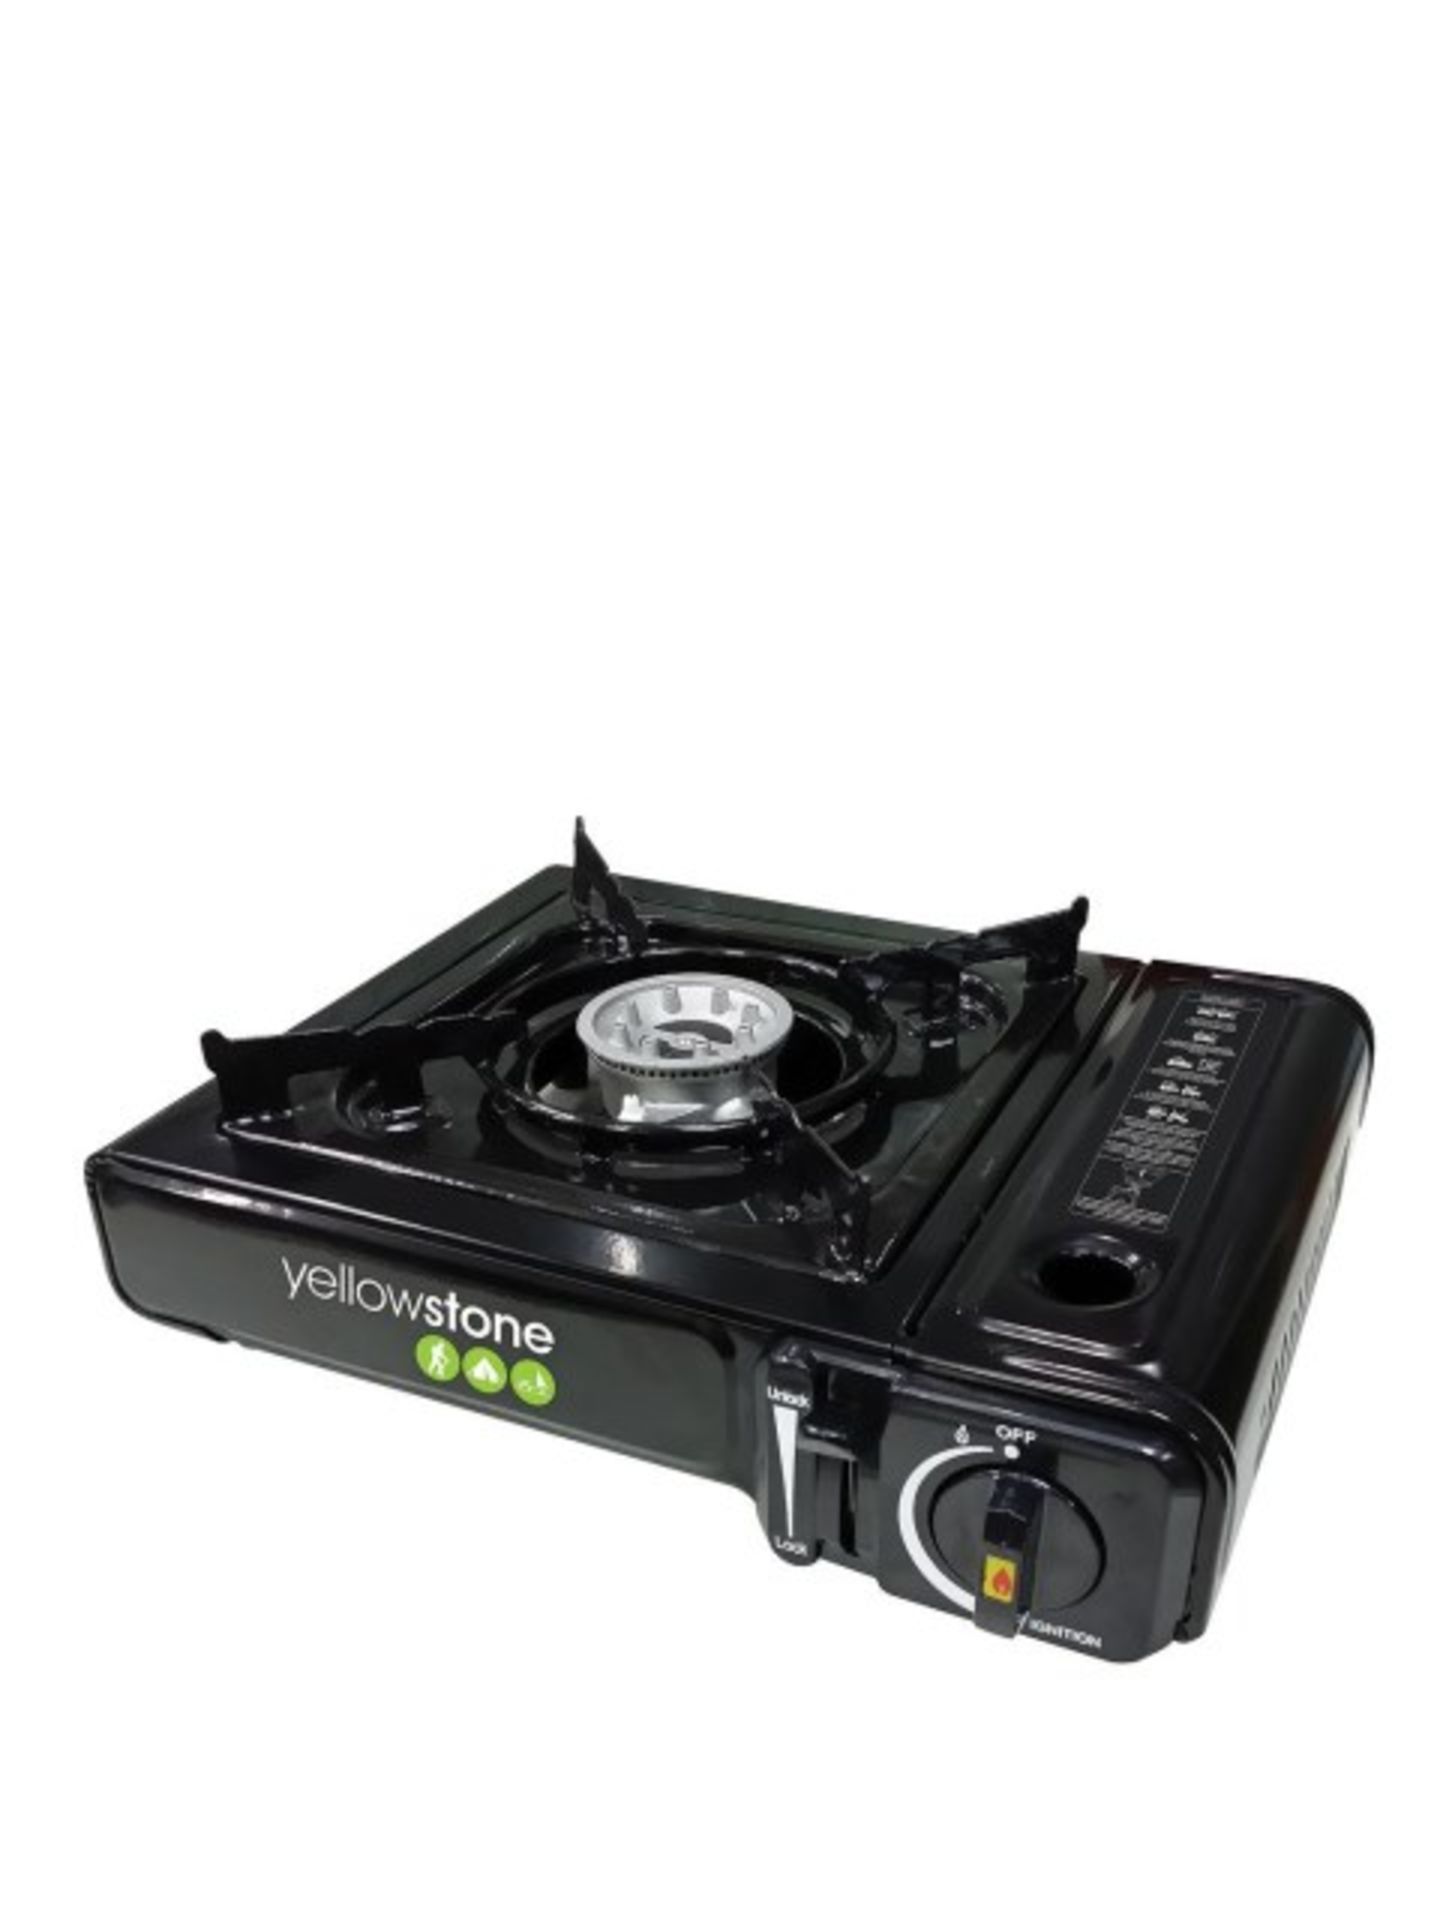 V *TRADE QTY* Brand New Portable Gas Stove In Briefcase X 3 YOUR BID PRICE TO BE MULTIPLIED BY